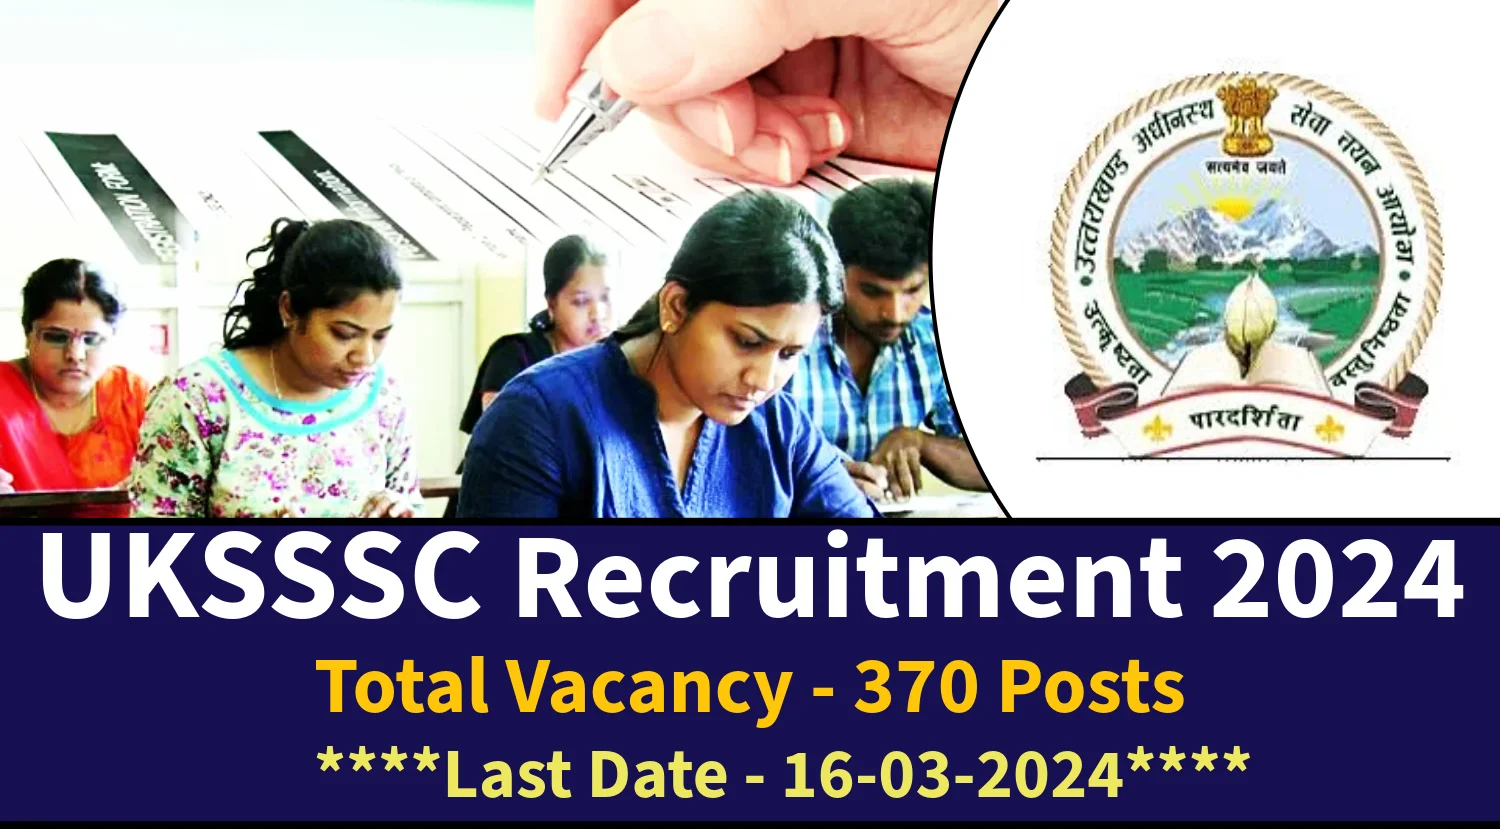 UKSSSC ITI Instructor Recruitment 2024 for 370 Posts